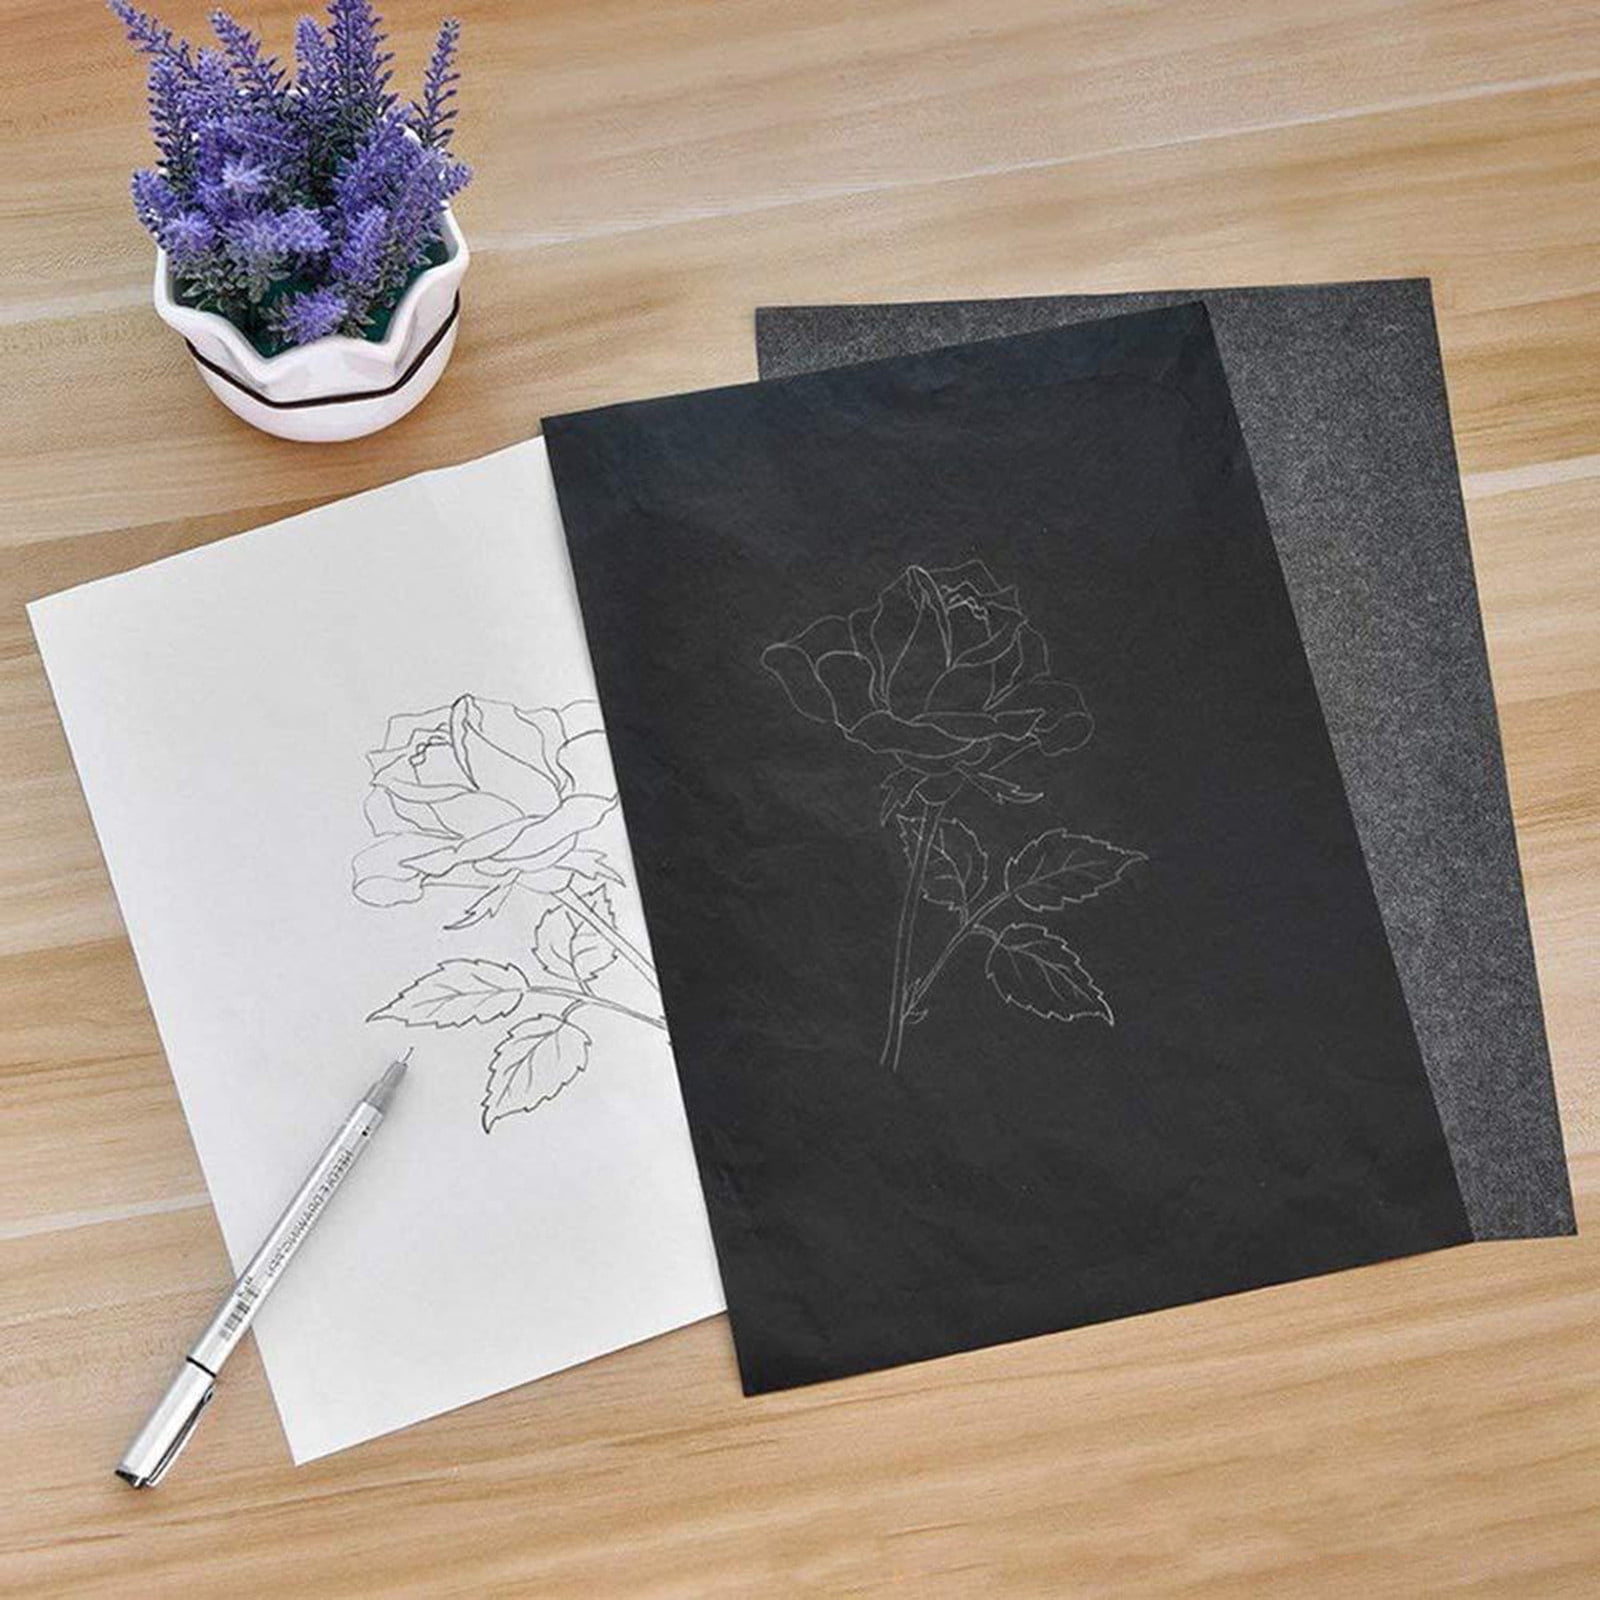 PSLER Carbon Transfer Paper for Wood Burning Craft, Paper, Canvas and Other Art Craft Surfaces(a4 Size)